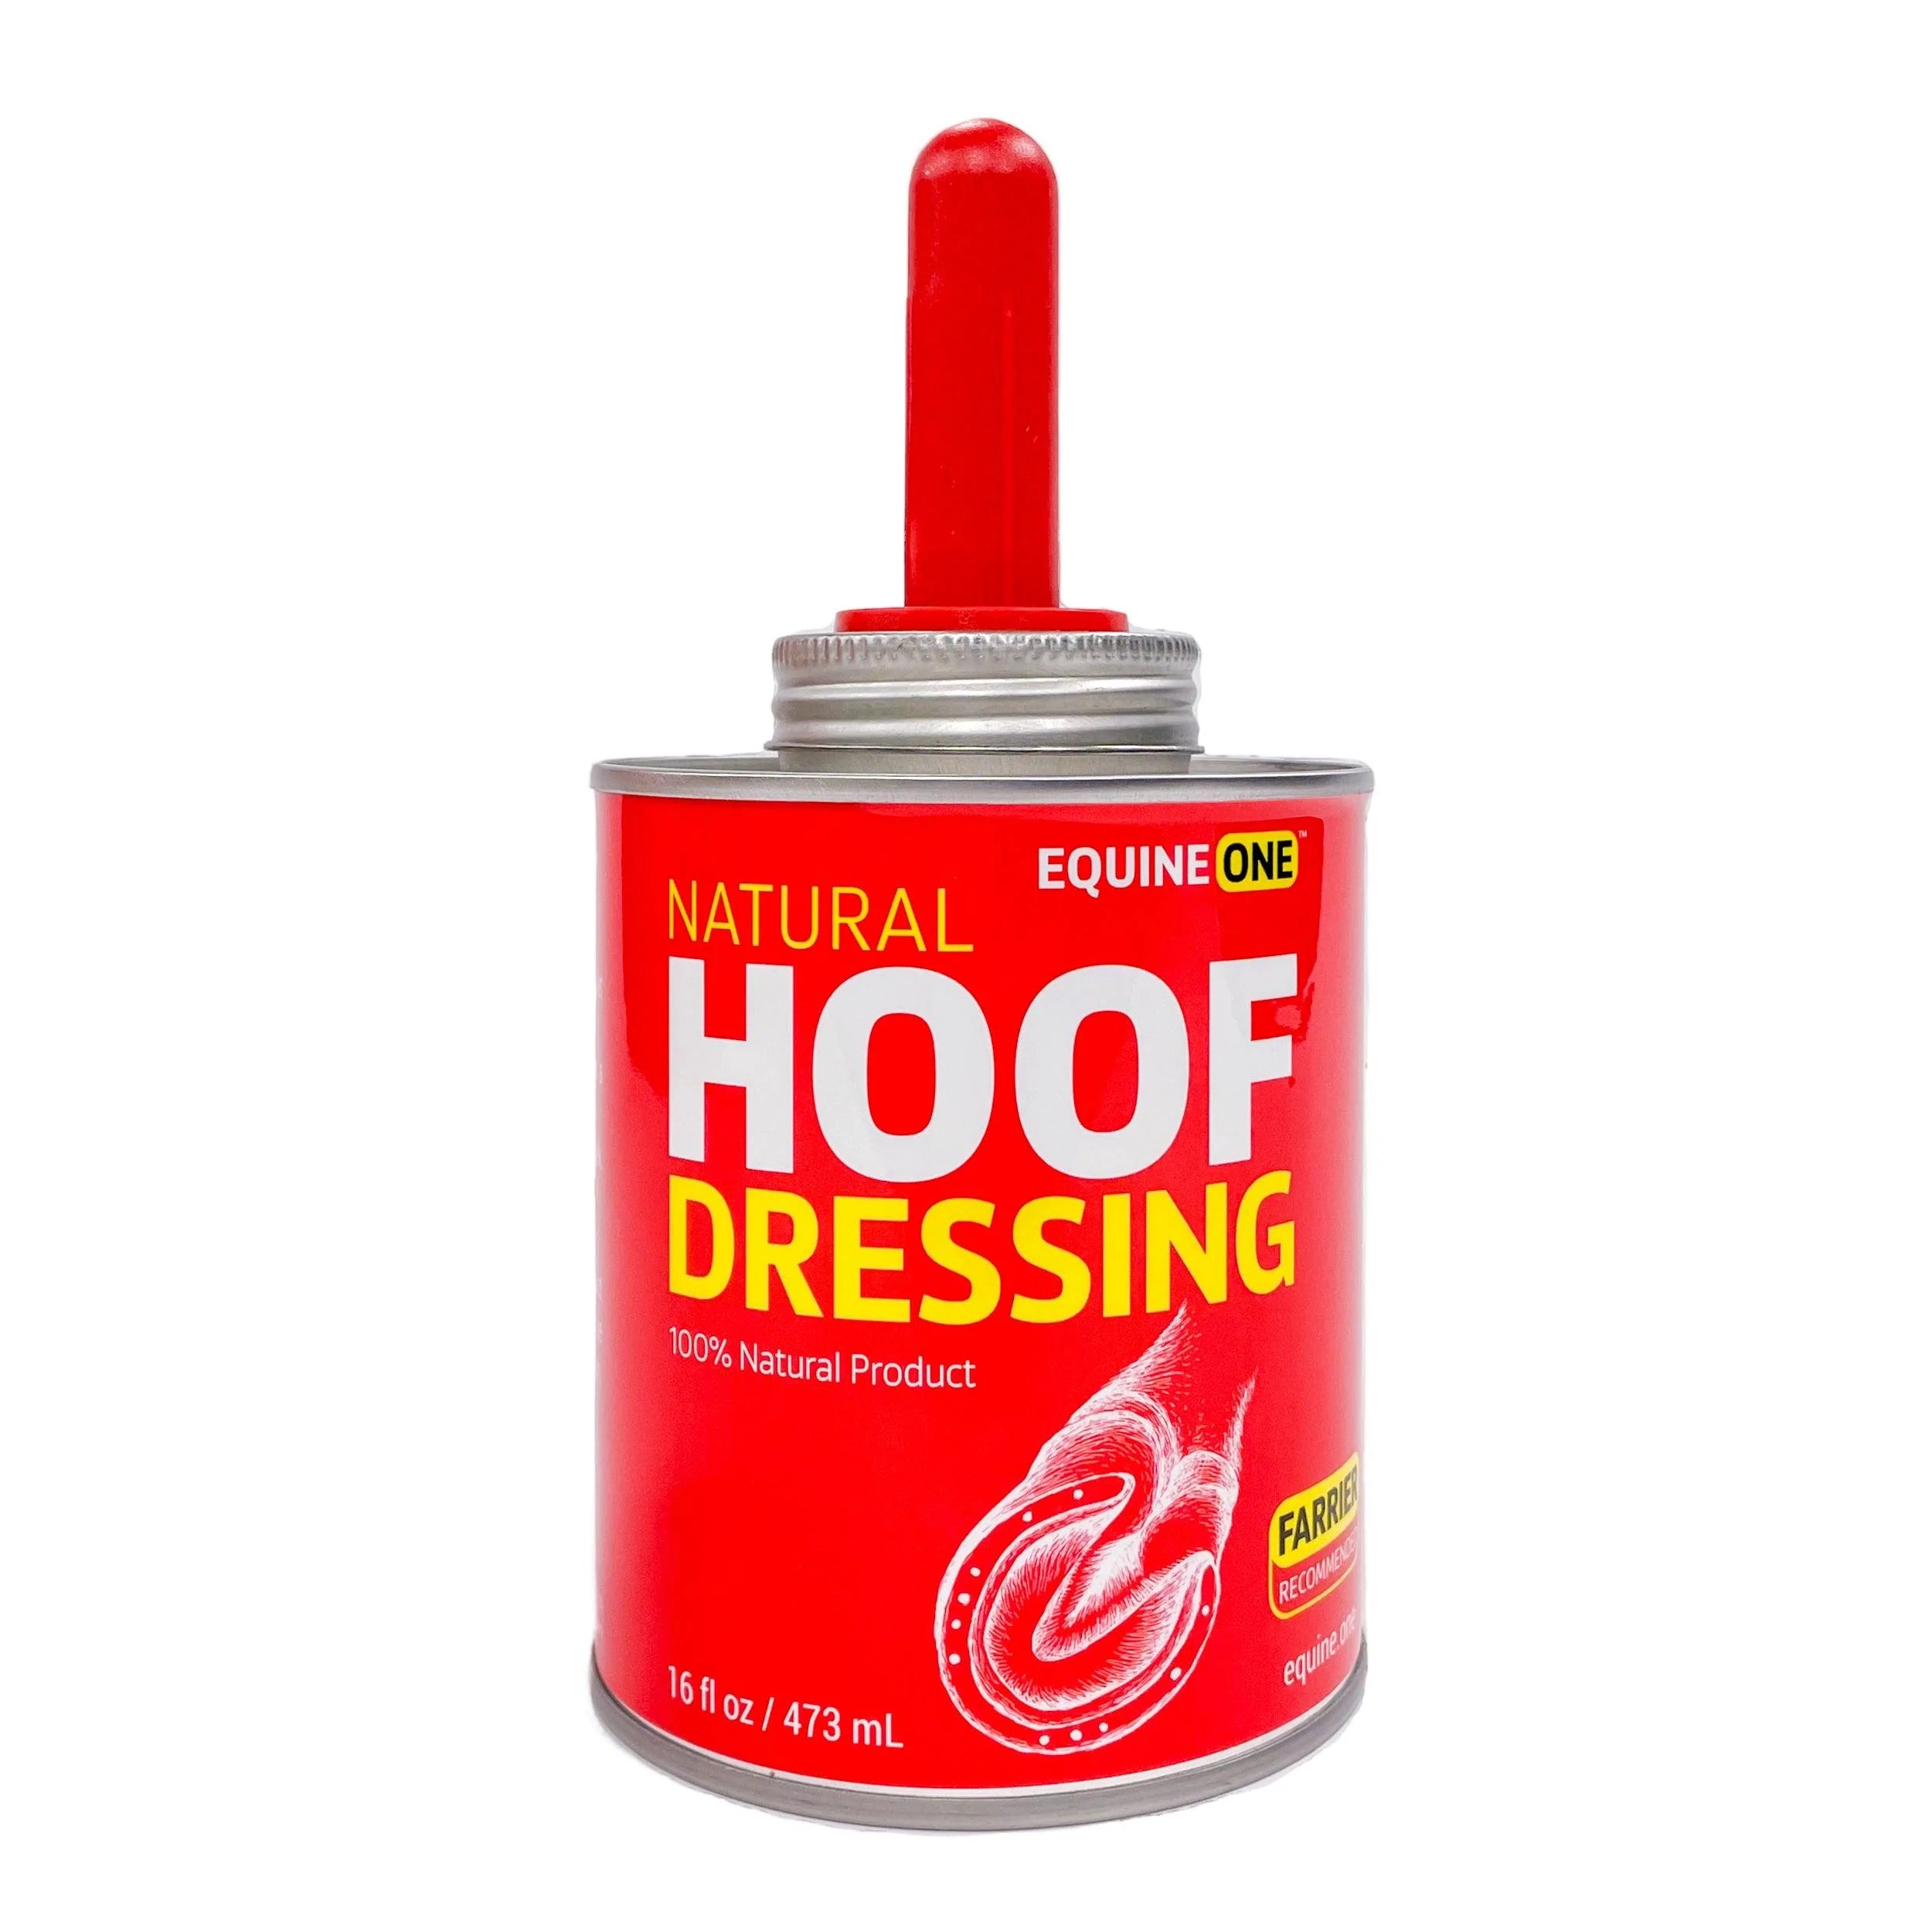 16 fl.oz. Tin Can - Equine One Natural Hoof Dressing - Equine One